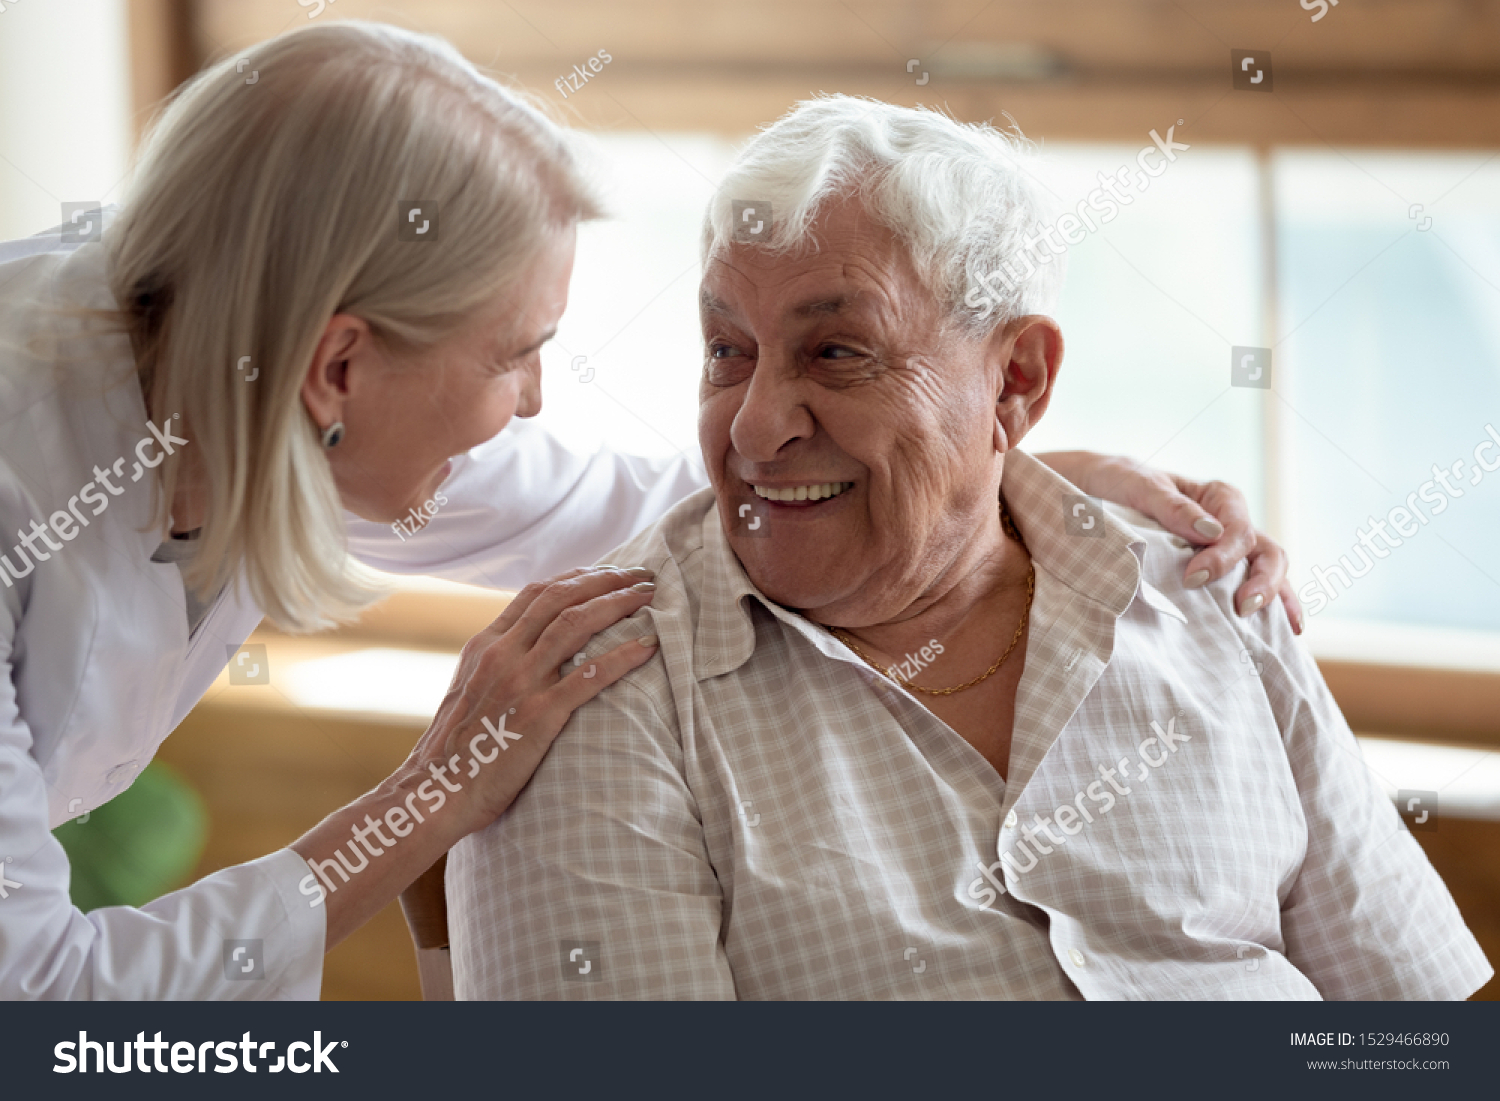 Caring middle-aged female licensed practical nurse in white coat talk to elderly patient 80s man, worker care about old healthcare consumer listens complaints give support, caregiving service concept #1529466890